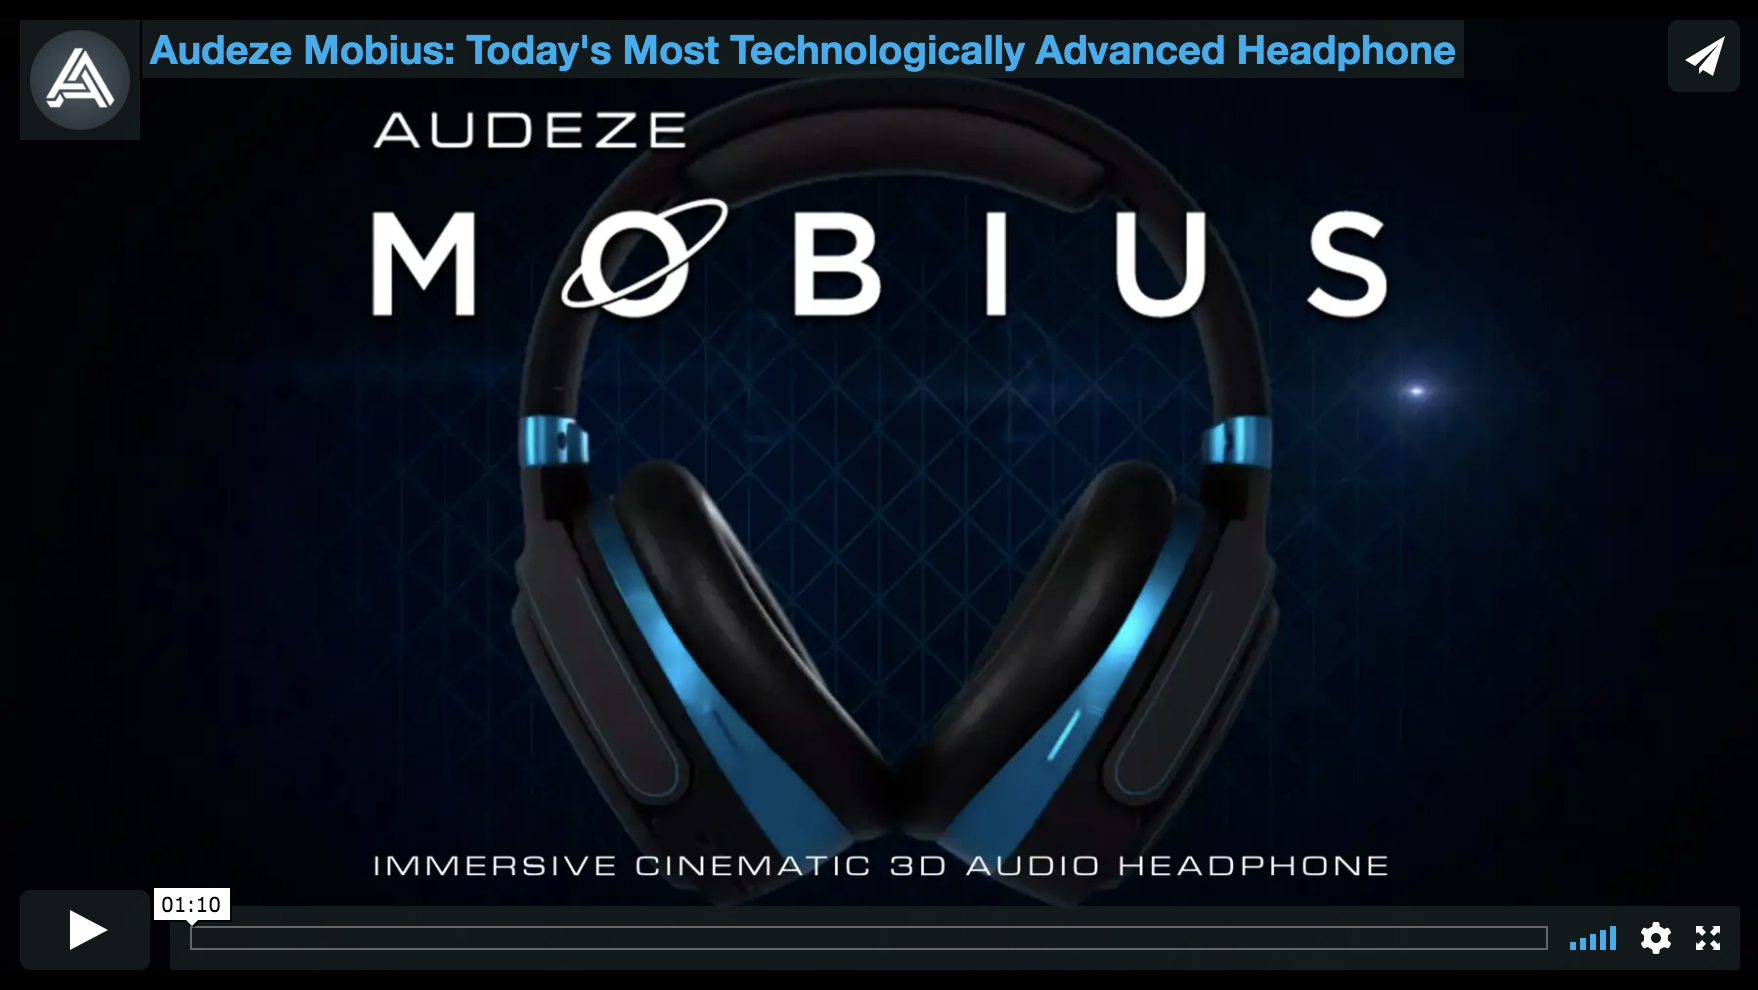 Audeze Mobius: Today's Most Technologically Advanced Headphone